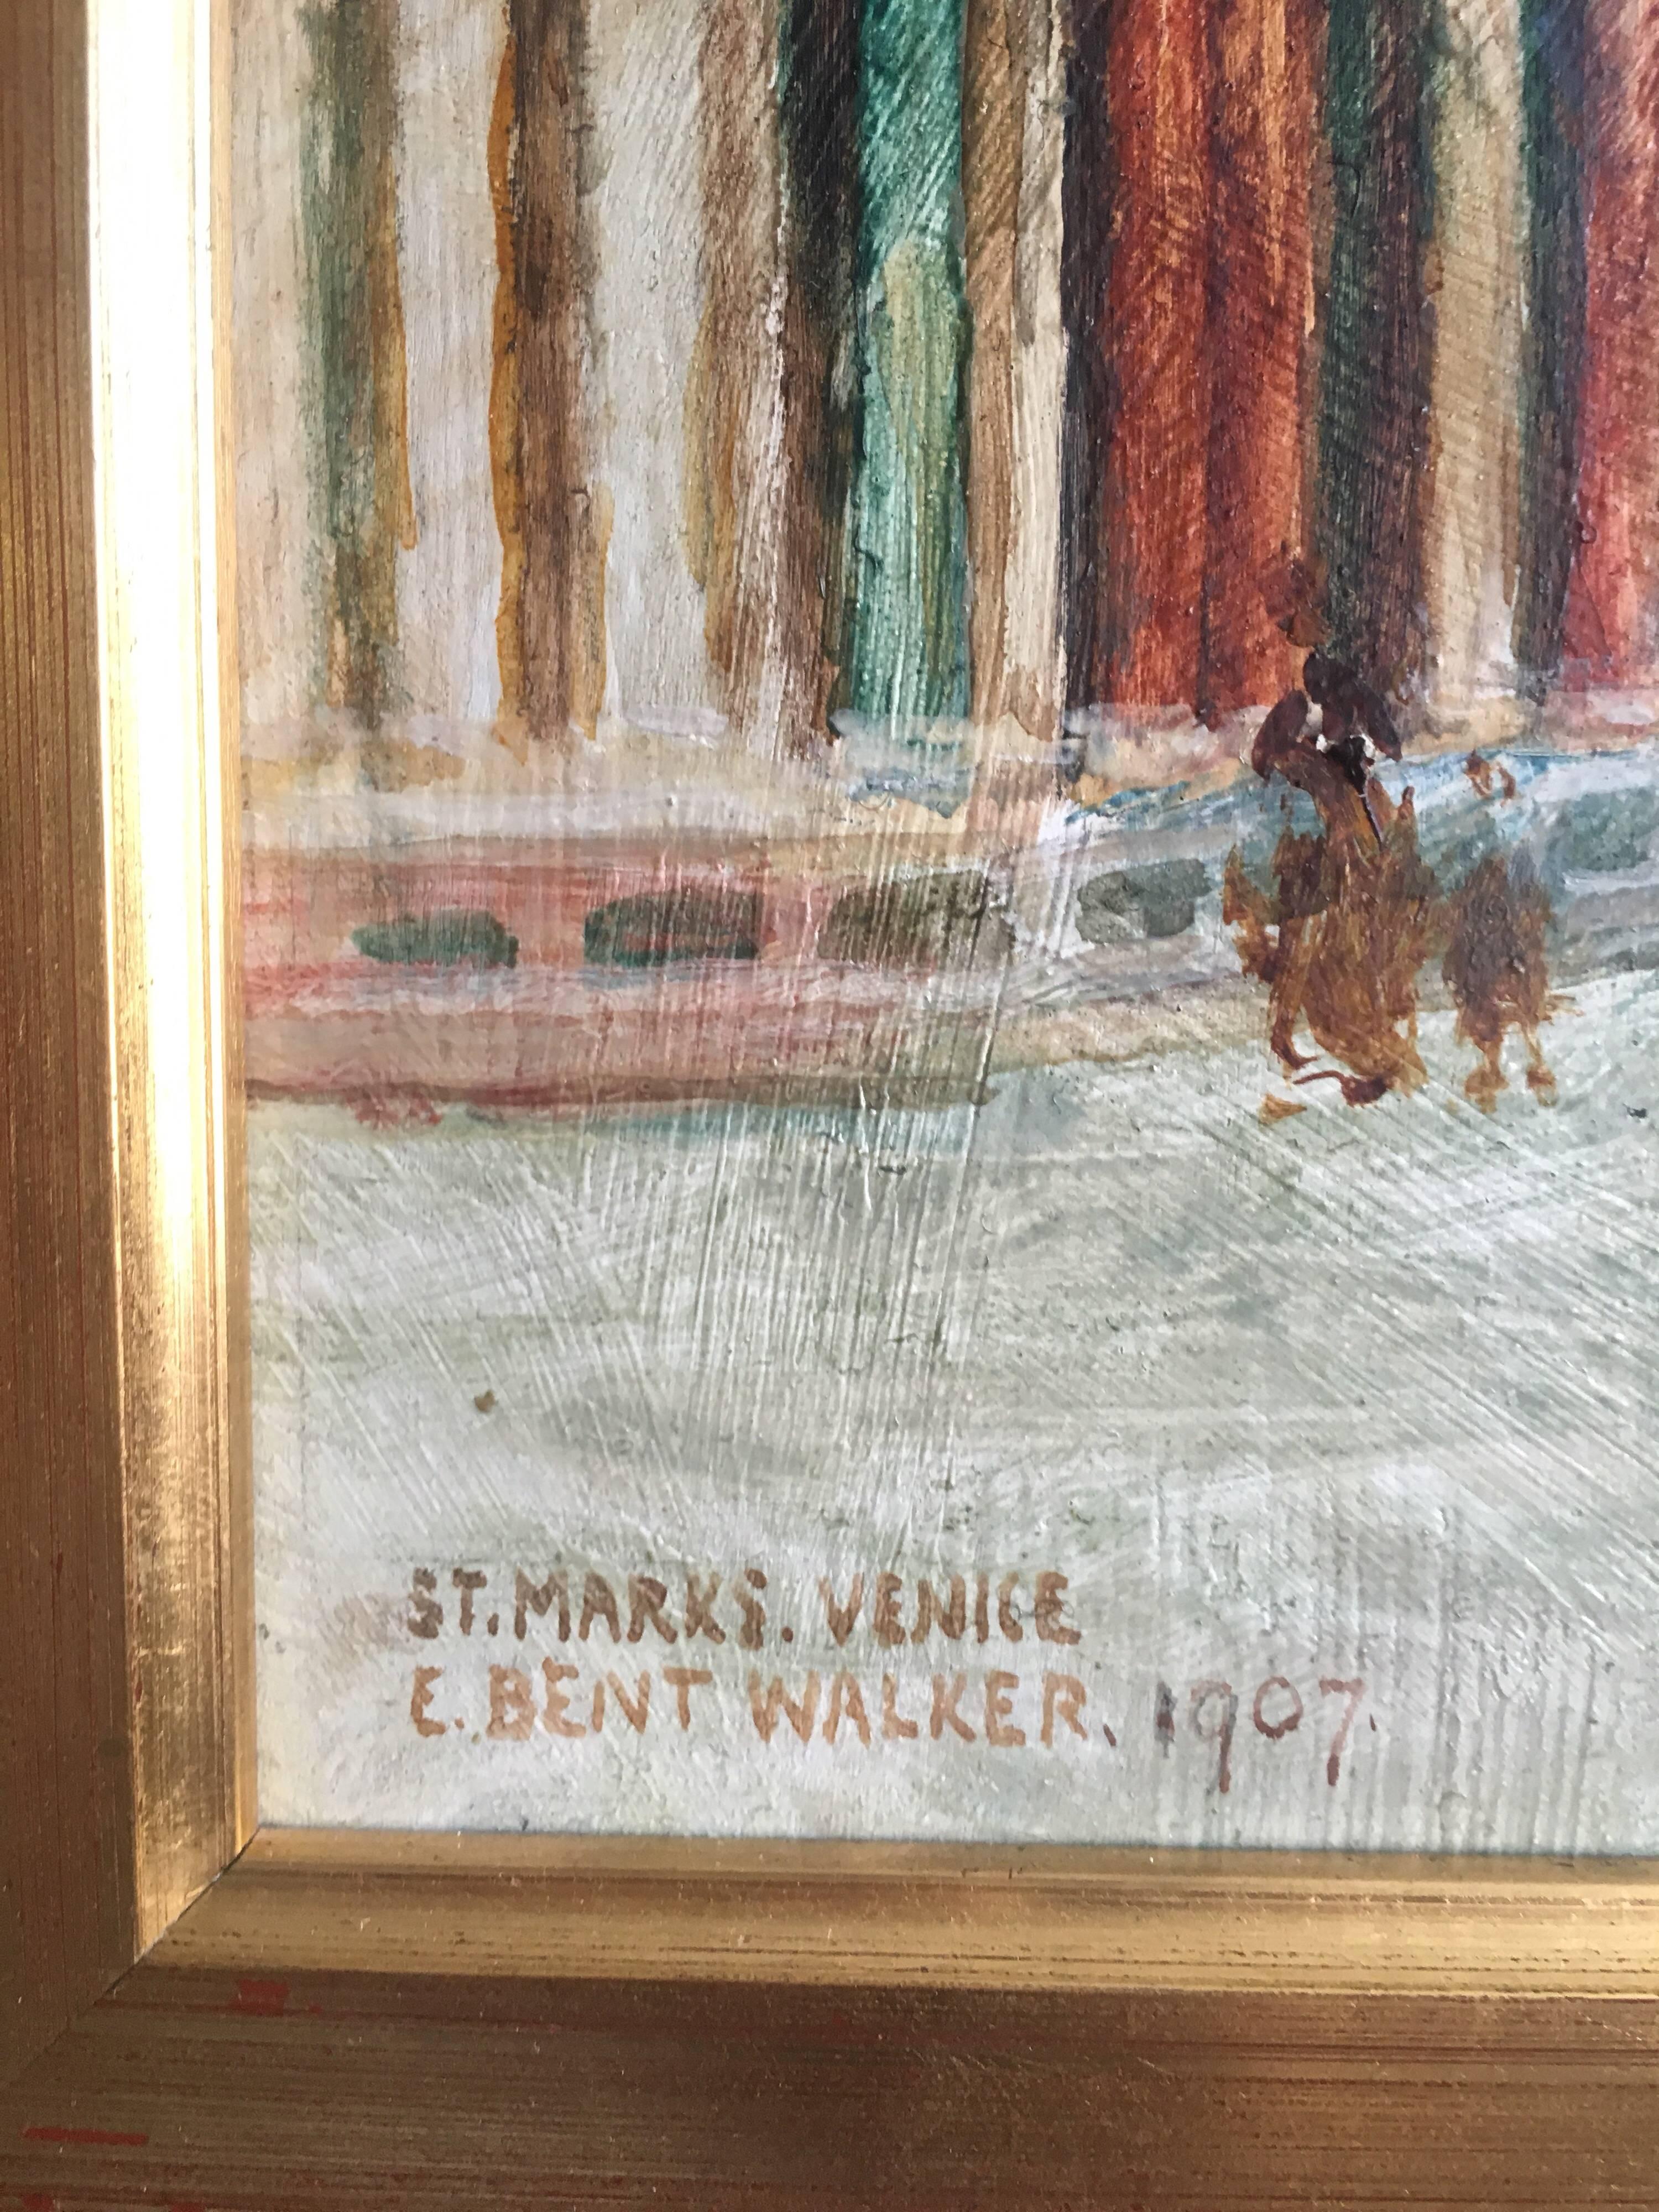 St. Marks, Venice, 1907 Signed Oil Painting  - Brown Interior Painting by L. Bent Walker